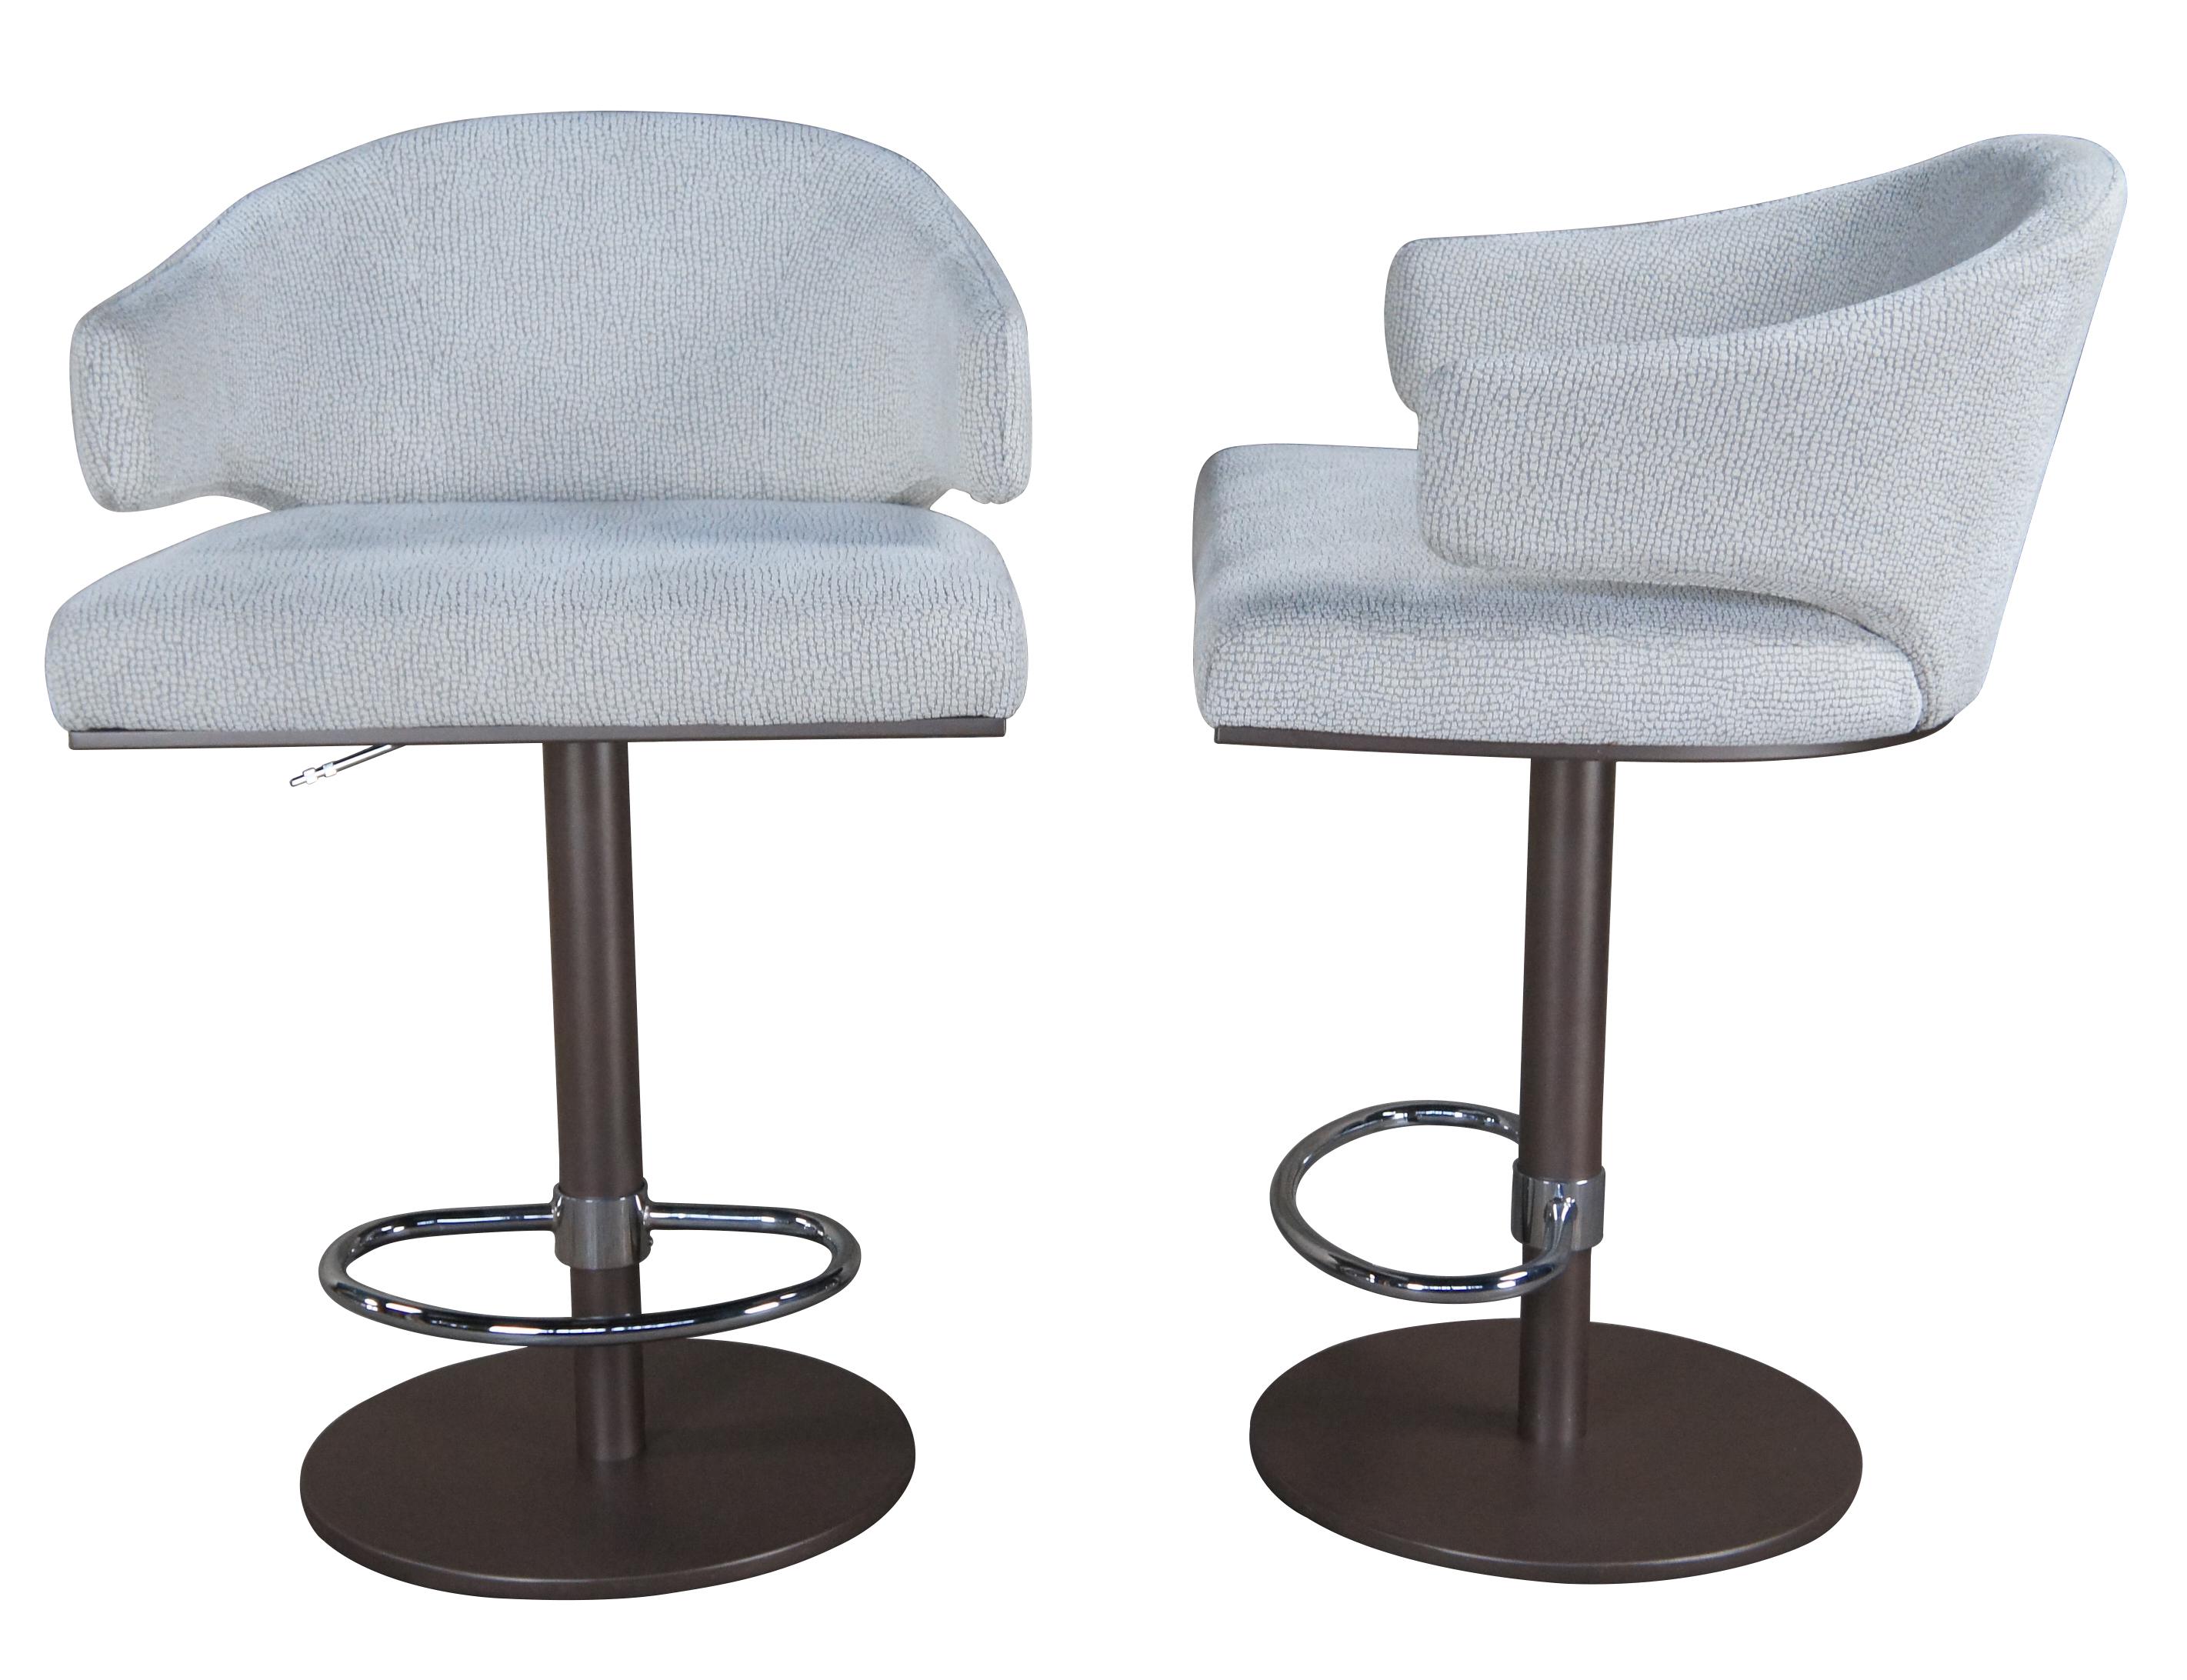 A set of five vintage Elliot bar stools by Elite Mfg corp.

A nod to the classic Scandinavian modern era. The Elliot seating group is a unique mix of ergonomic comfort and sculptural form. This shell like back/arm has an unexpected under-arm cut